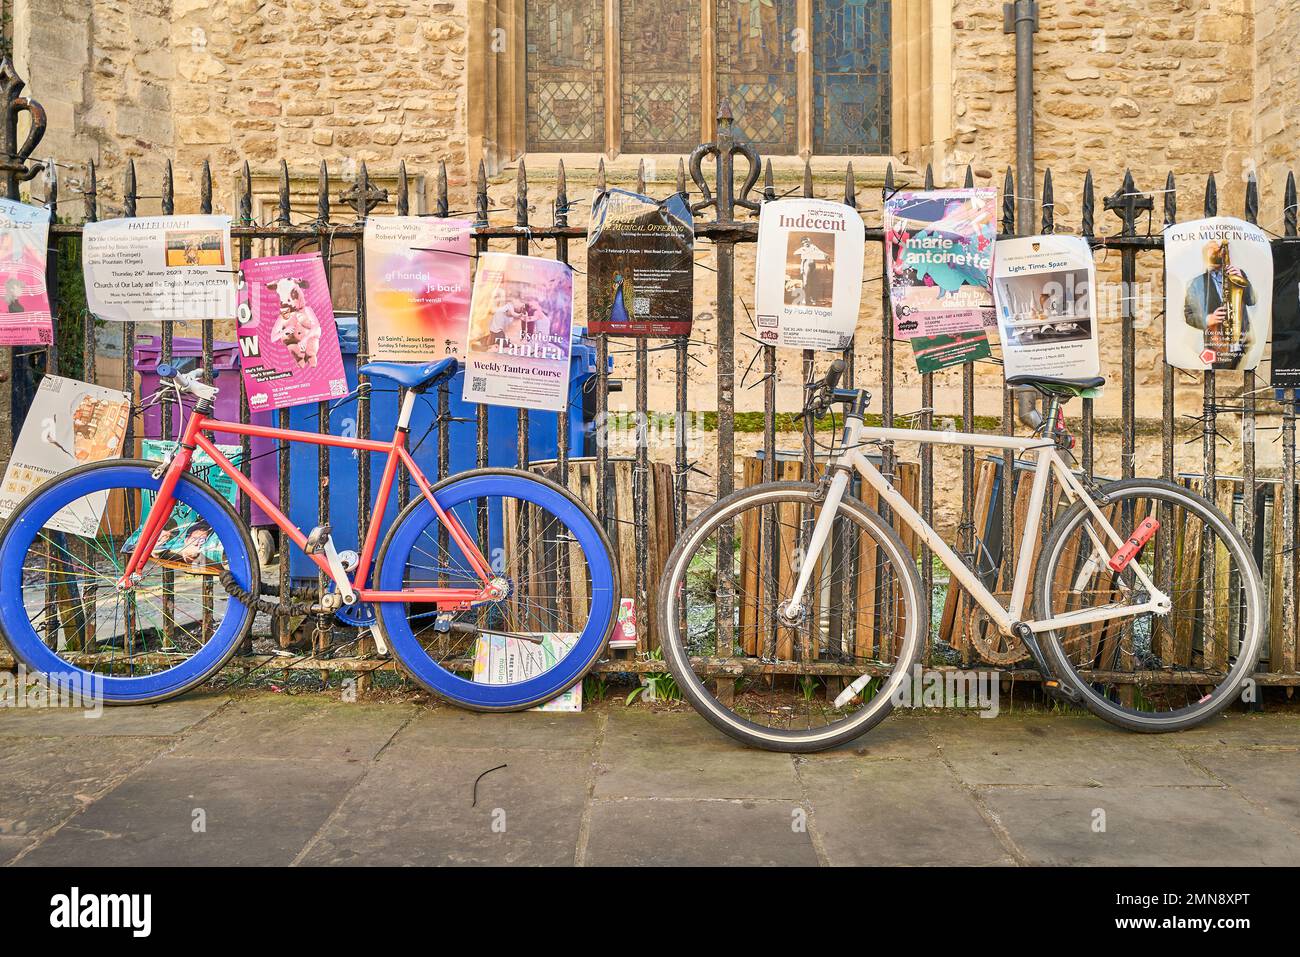 Cycles chained to the railing of St Mary's, the university church at Cambridge, England. Stock Photo